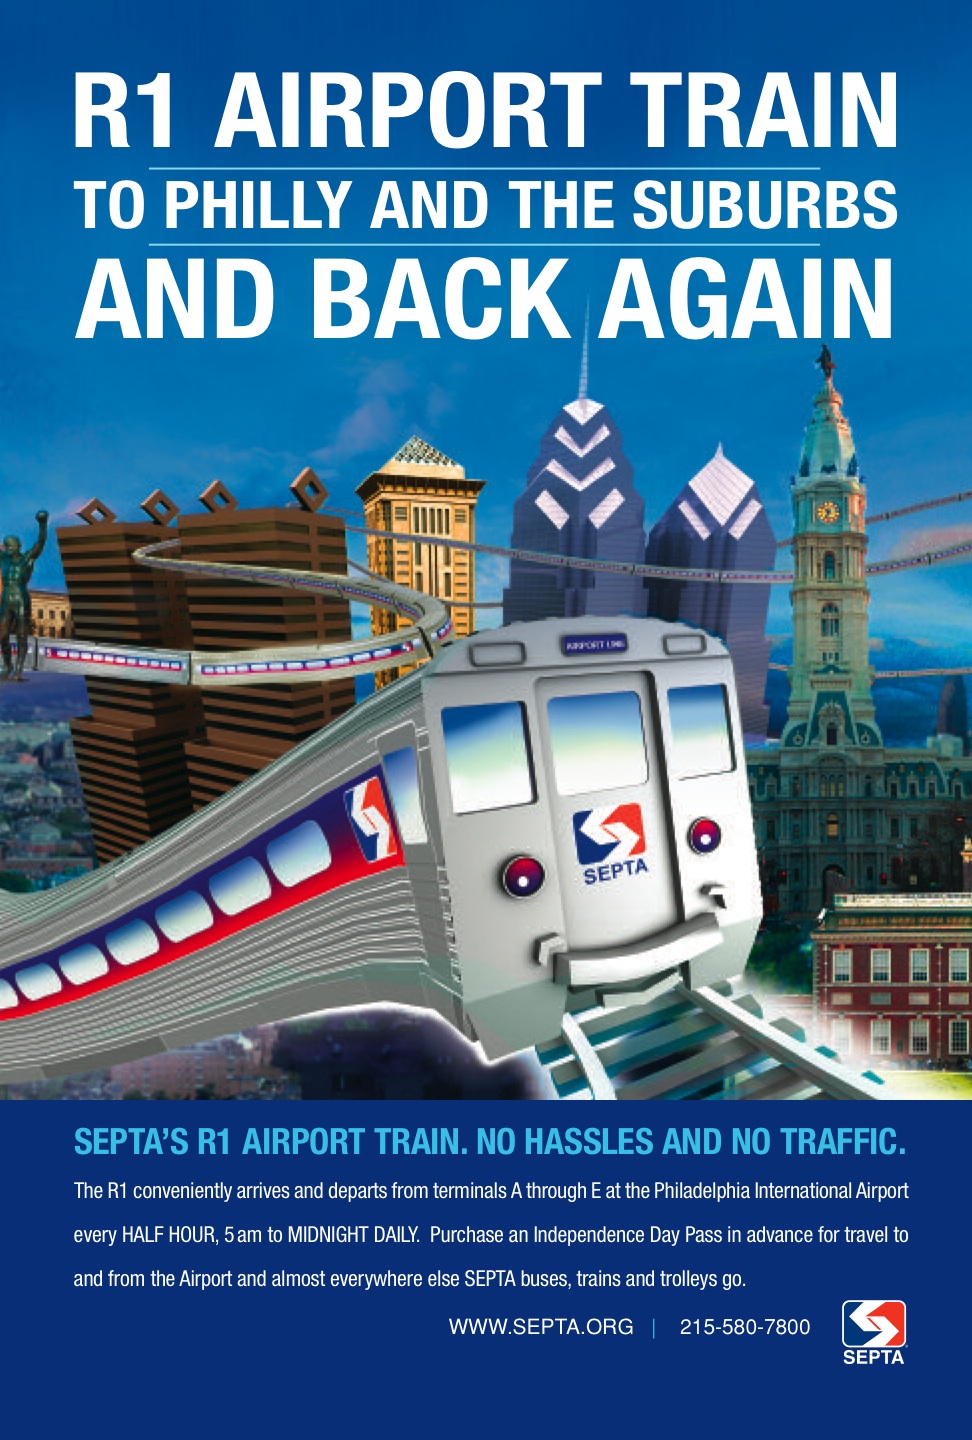 The R1 Line SEPTA advertisement promoting the service